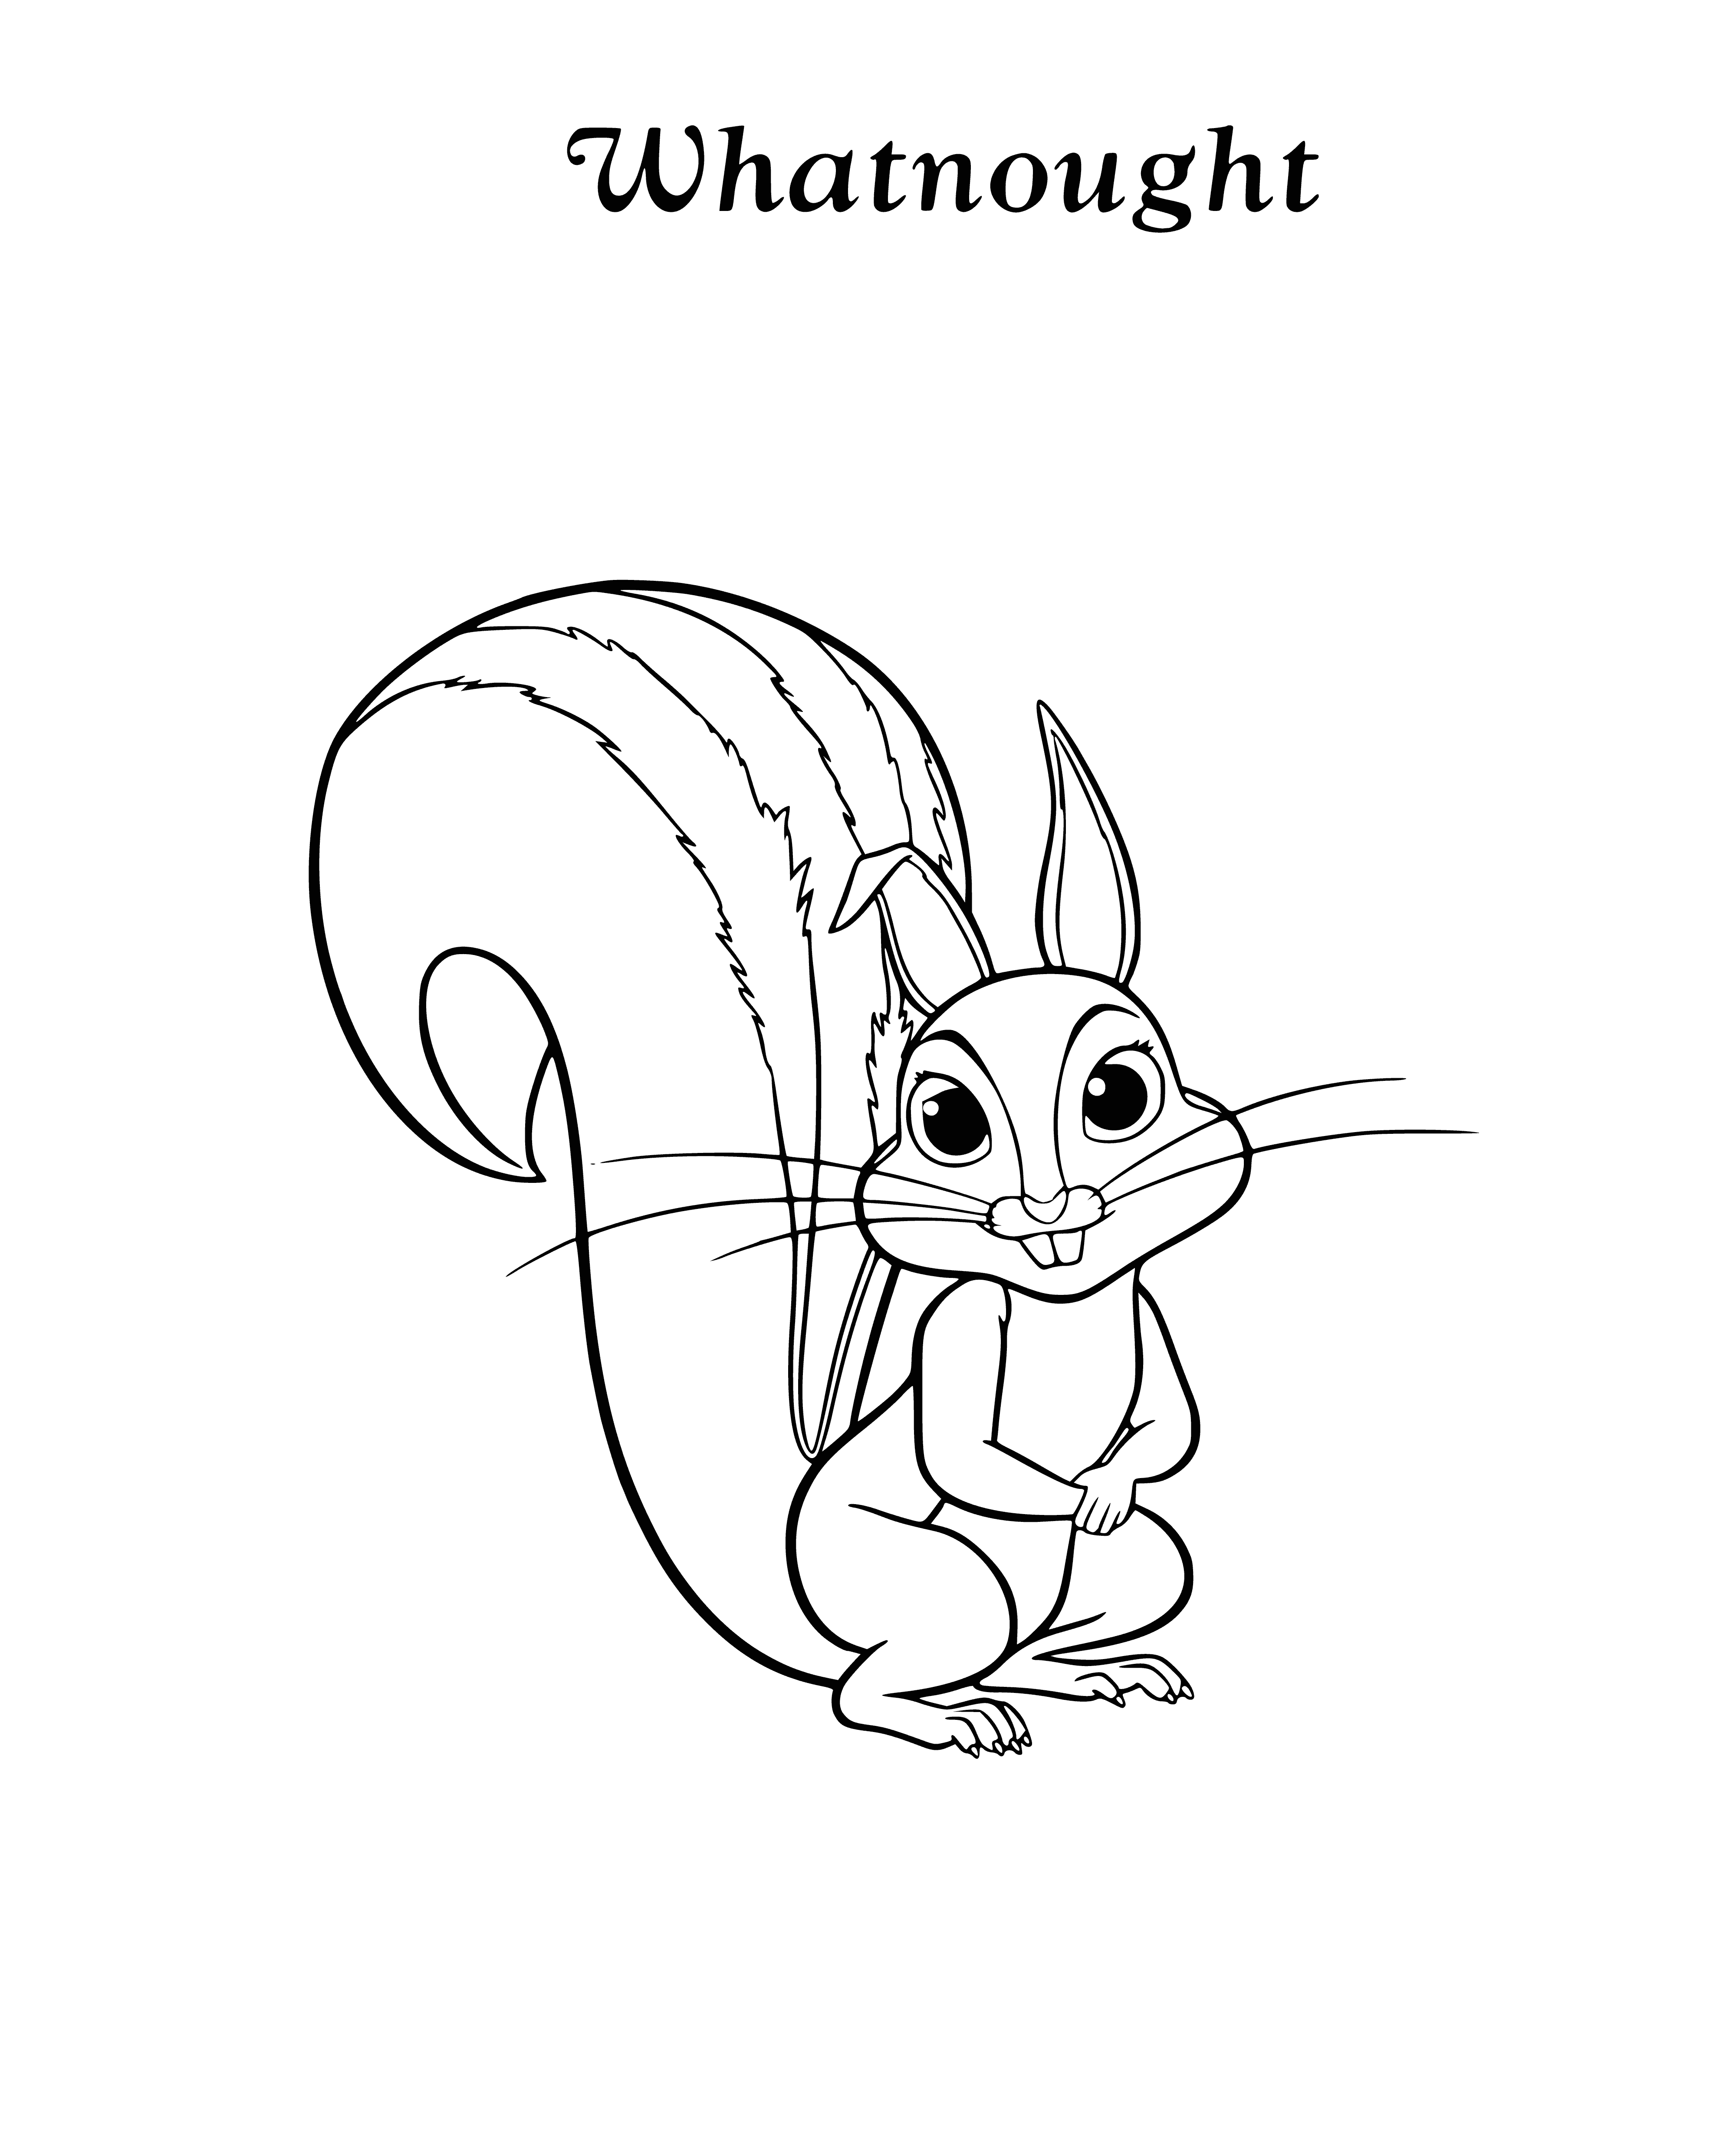 coloring page: Sofia holds a small, furry squirrel with a round, green nut in its mouth in a dark room with a glowing white door. #shortstories #adventure